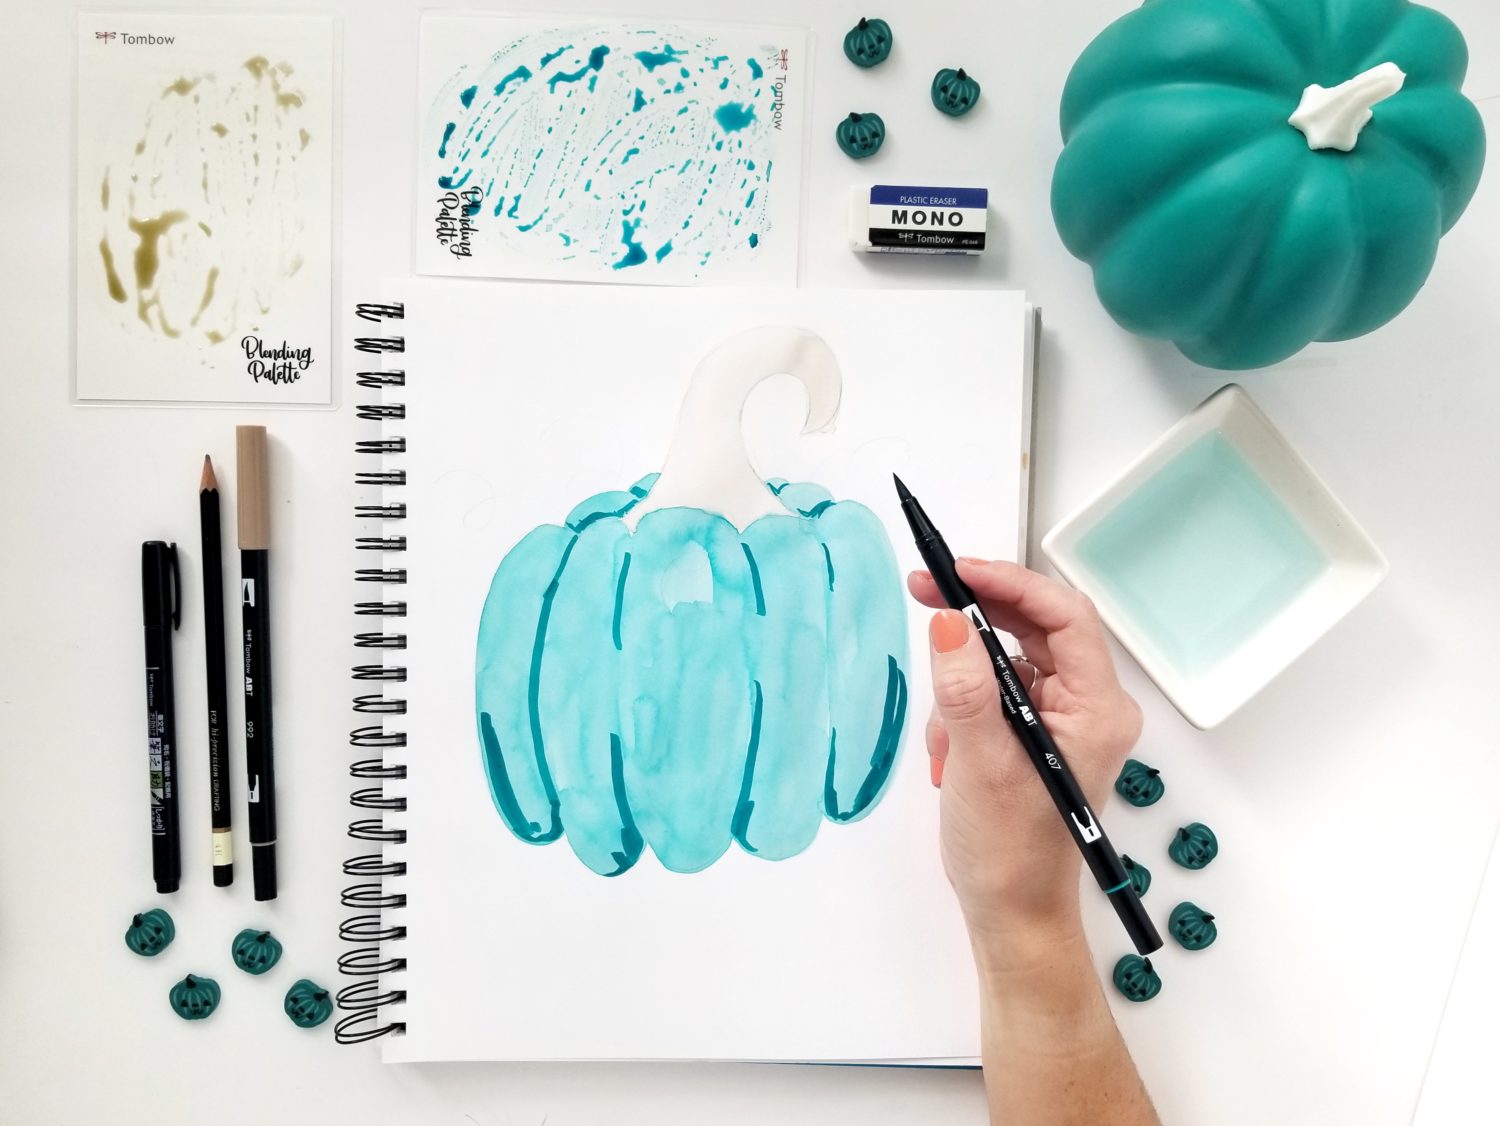 Create a Teal Pumpkin sign using @tombowusa Dual Brush Pens, and let trick-or-treaters know you have non-food treats available! By @graceannestudio.